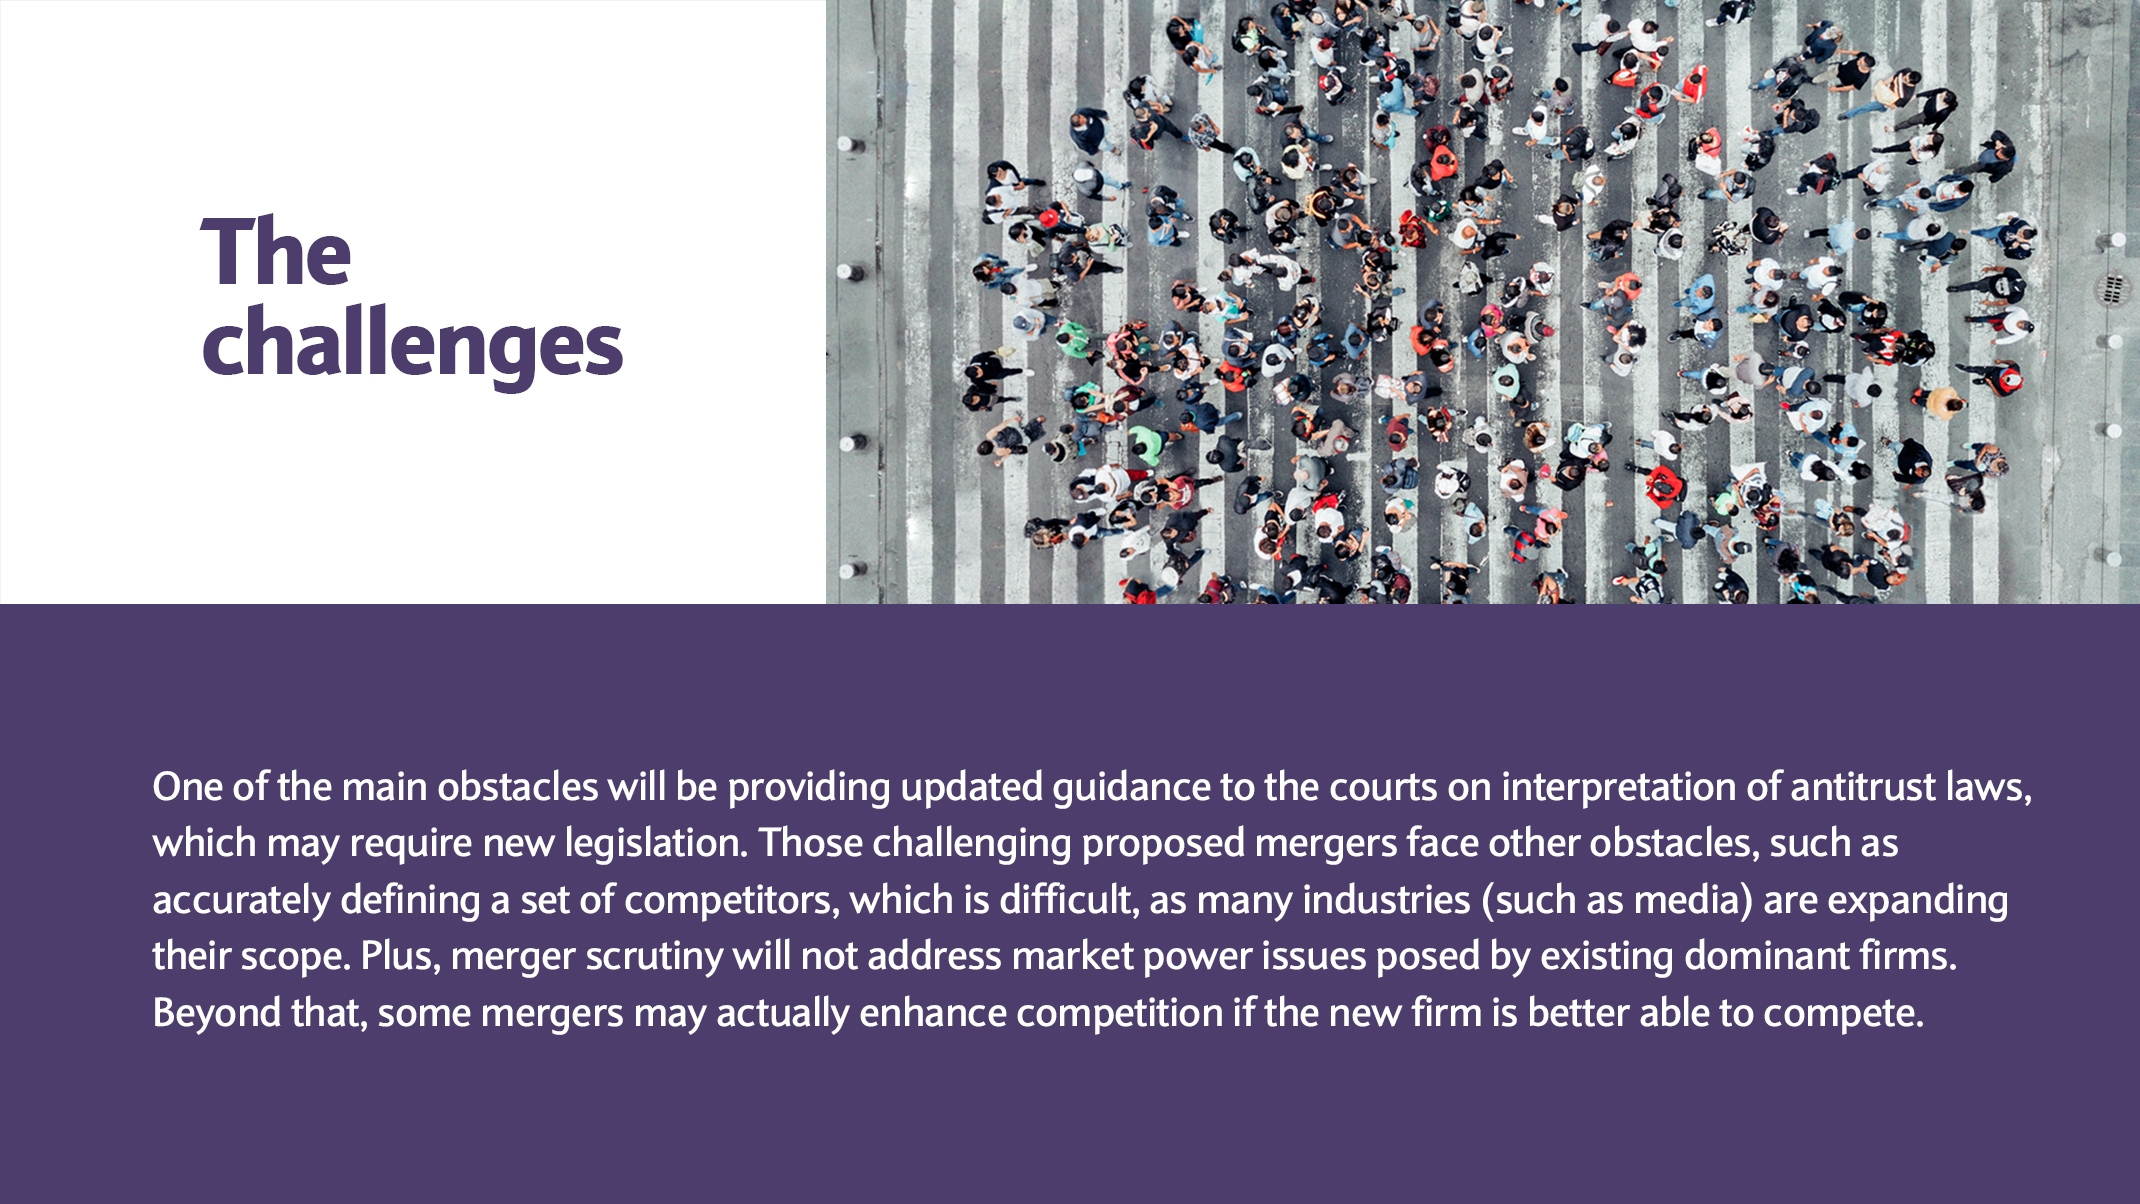 One of the main obstacles will be providing updated guidance to the courts on interpretation of antitrust laws, which may require new legislation. Those challenging proposed mergers face other obstacles, such as accurately defining a set of competitors, which is difficult, as many industries (such as media) are expanding their scope. Plus, merger scrutiny will not address market power issues posed by existing dominant firms. Beyond that, some mergers may actually enhance competition if the new firm is better able to compete.